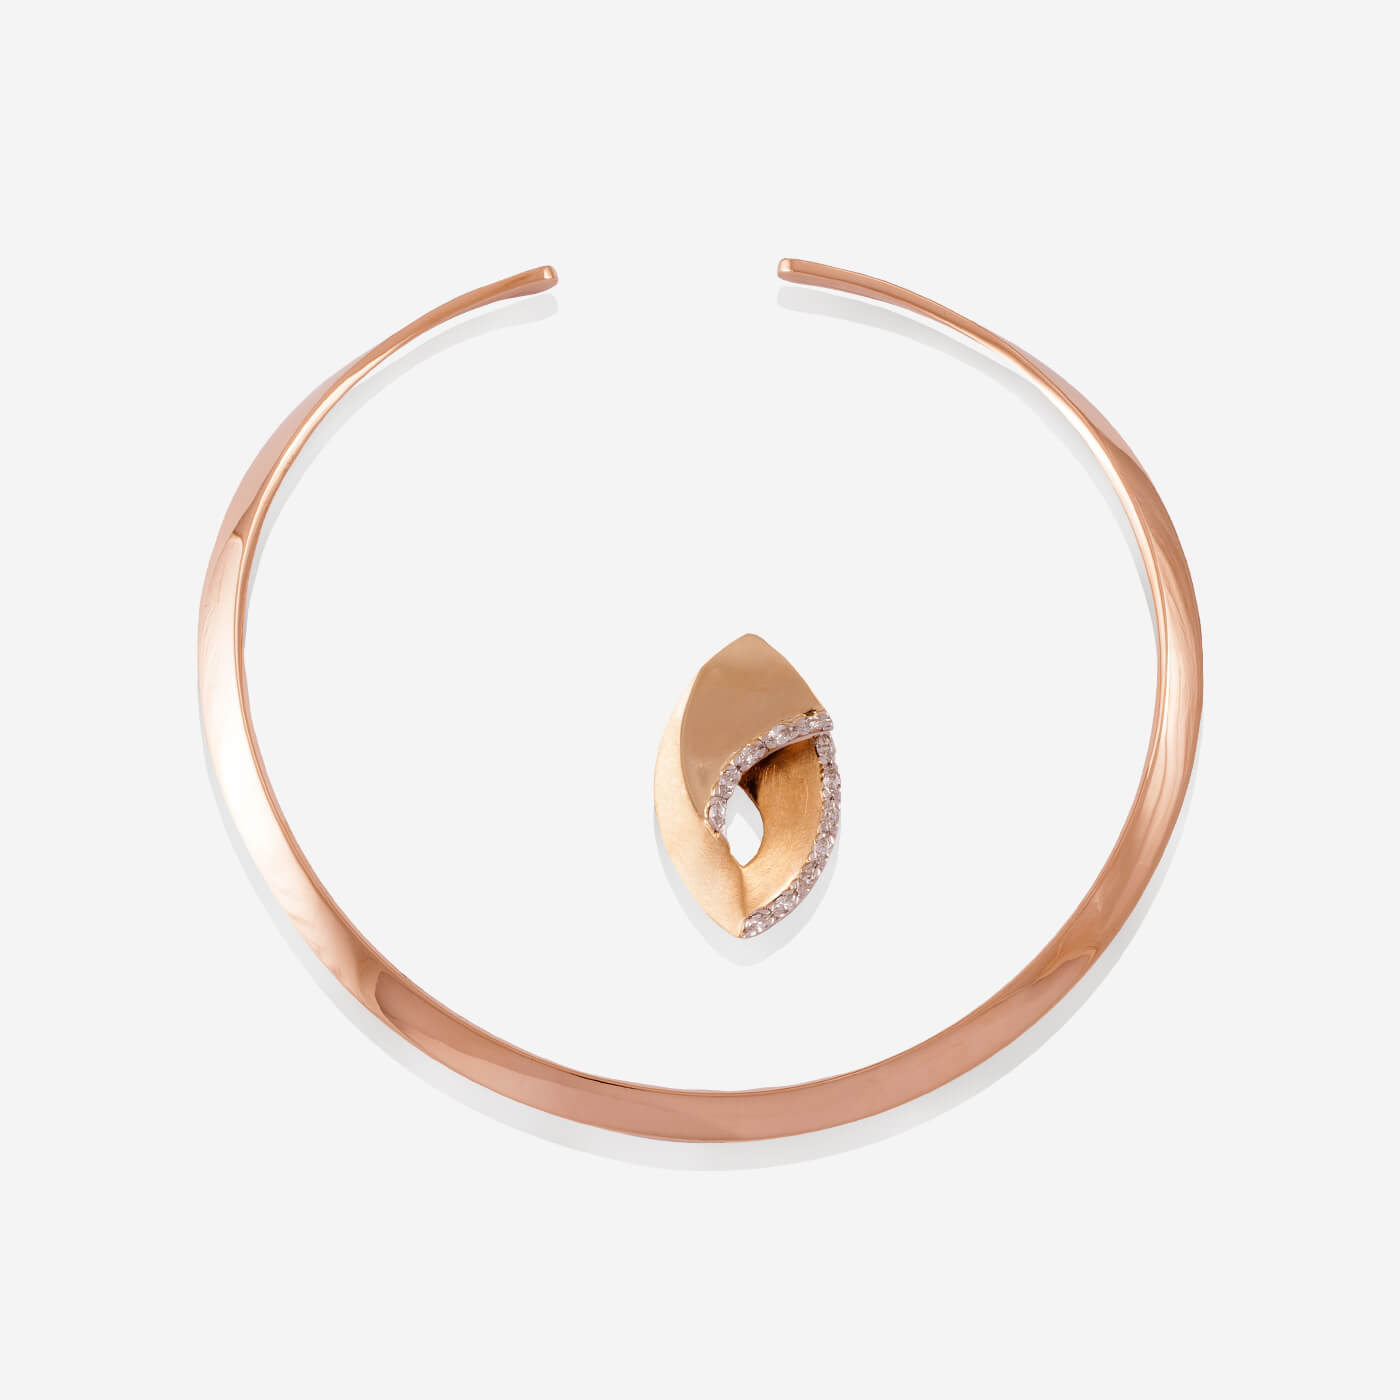 Rose Gold Choker With Removable Diamonds Pendant  - Ref: RG03335